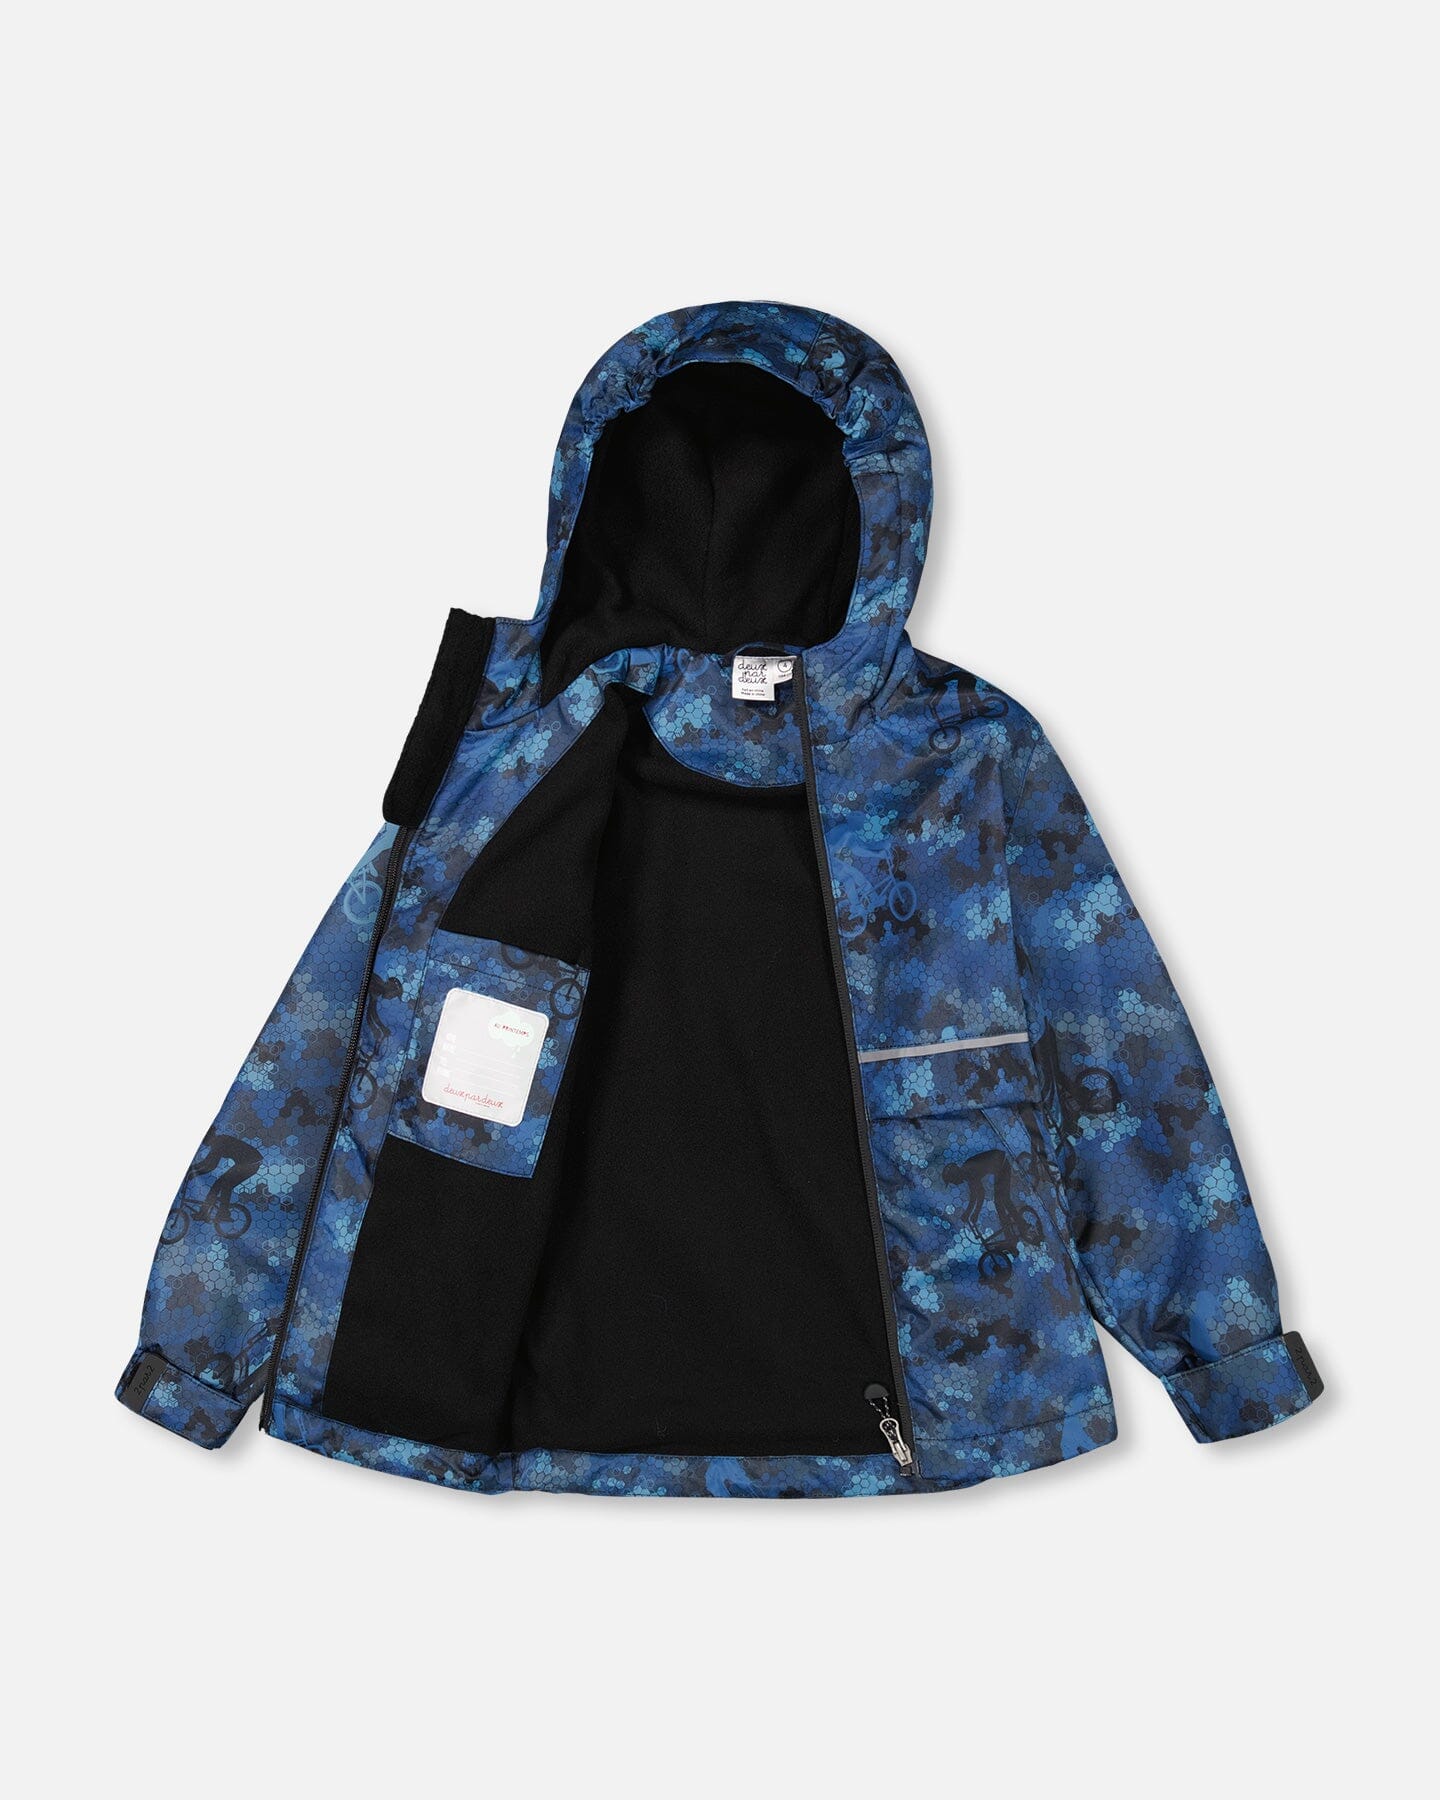 Two Piece Hooded Coat And Overalls Mid-Season Set Blue Printed Bike and Black Outerwear Deux par Deux 